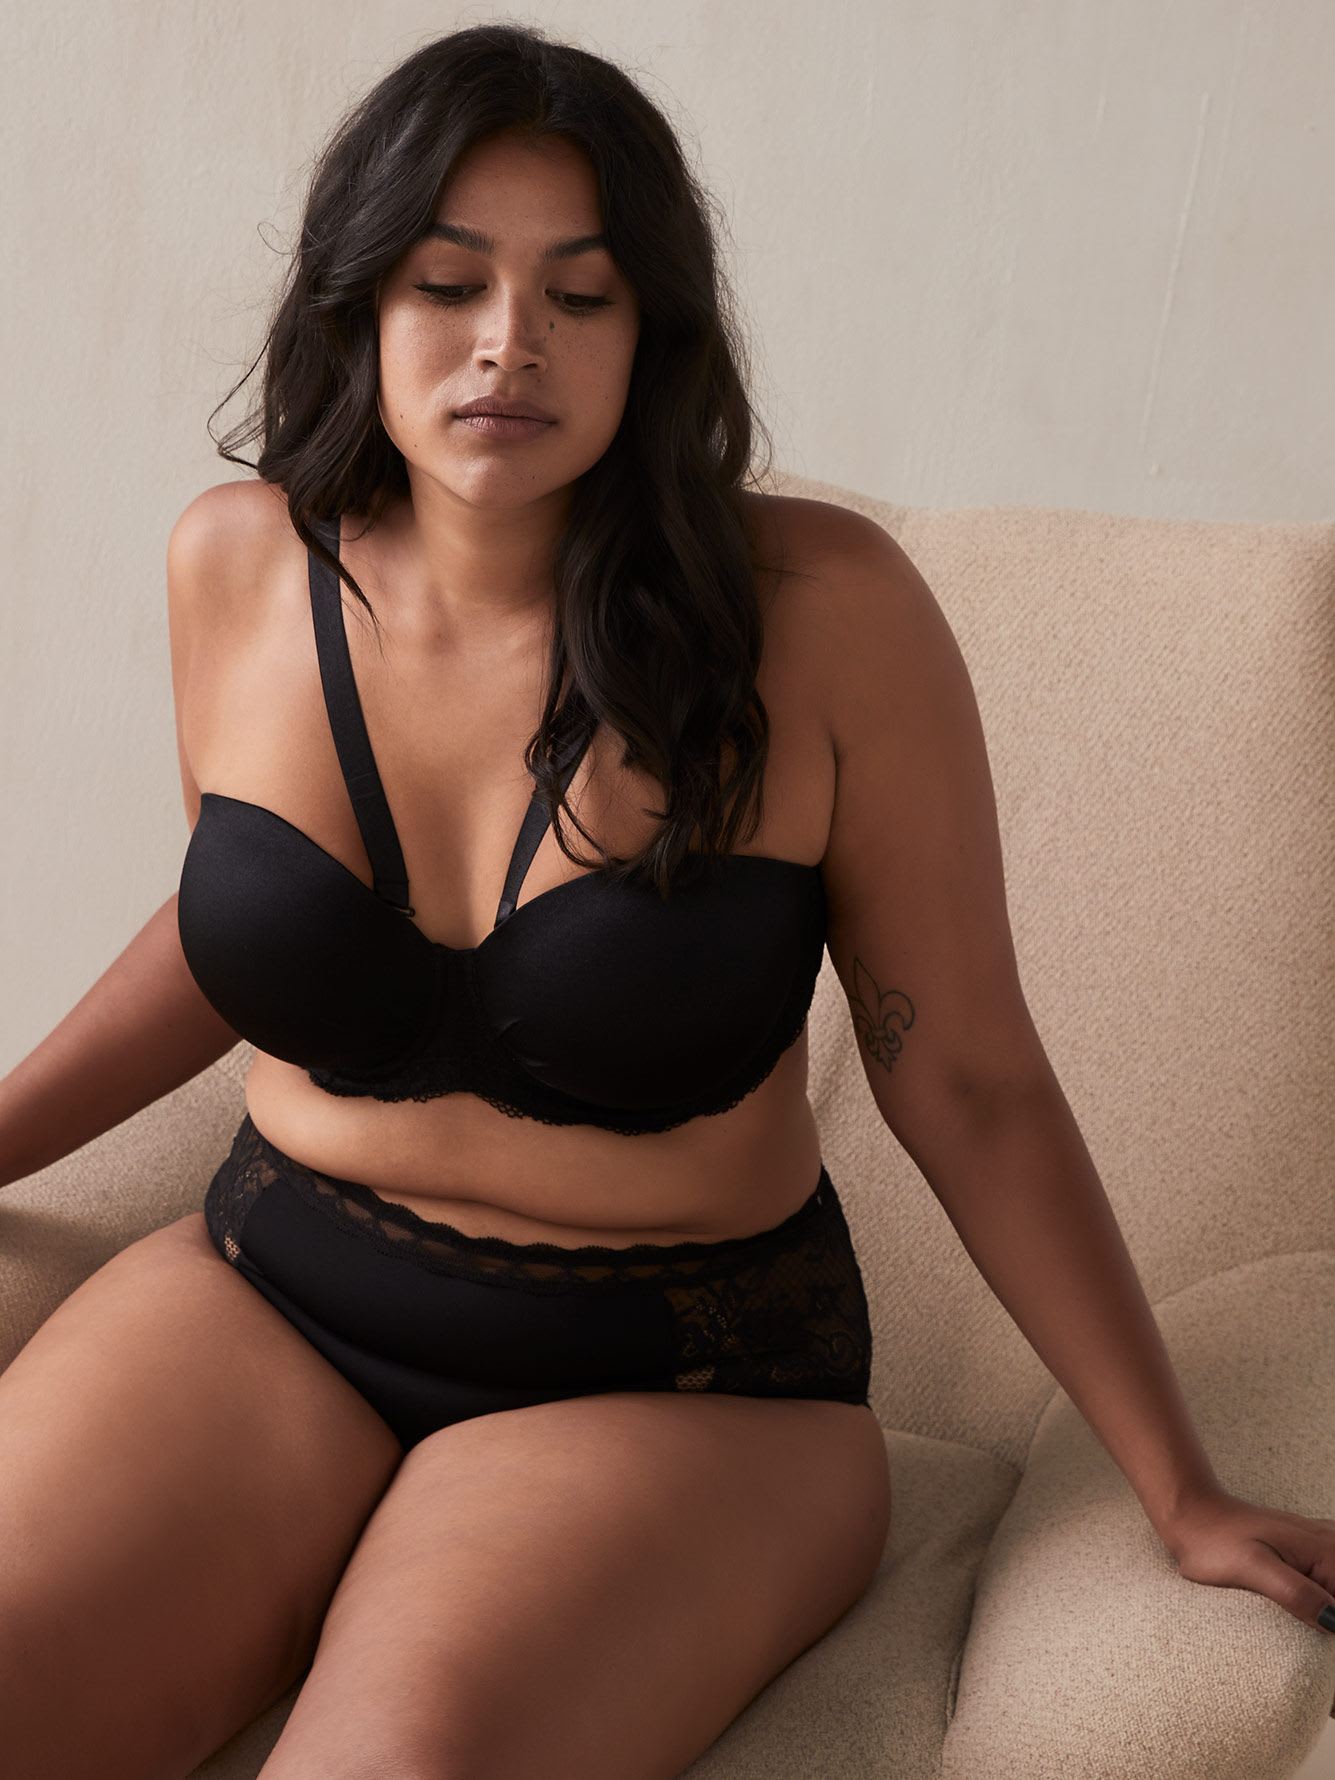 penningtons on X: Say hello to the Convertible Bra. 👋 It's an all-in-one  bra with straps that adjust 5 different ways. We like to think of it as the  Ferrari of bras.